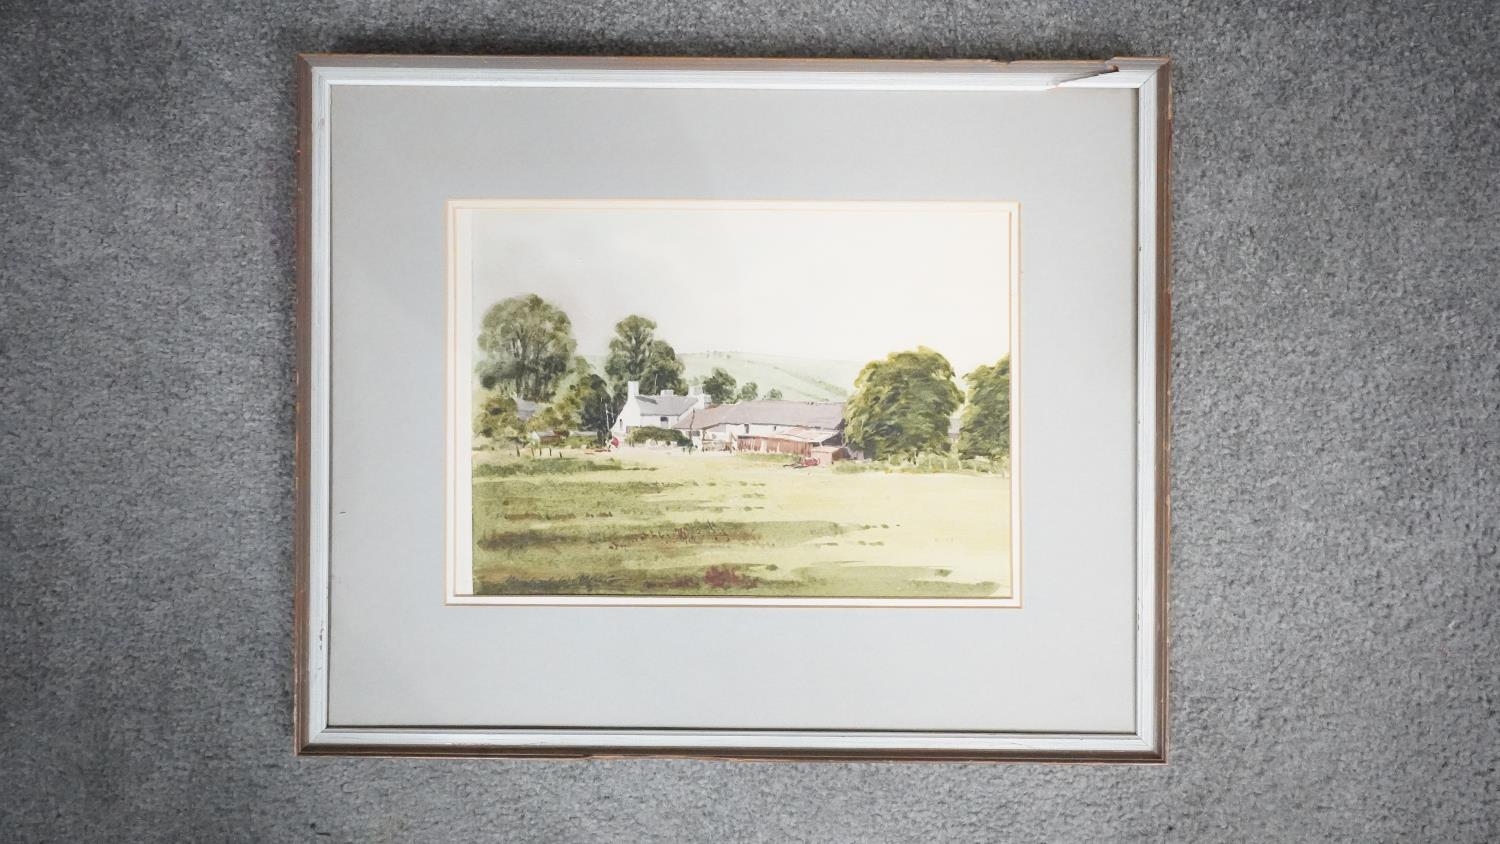 Michael W King - A framed watercolour on paper of a countryside landscape with cottage. Signed by